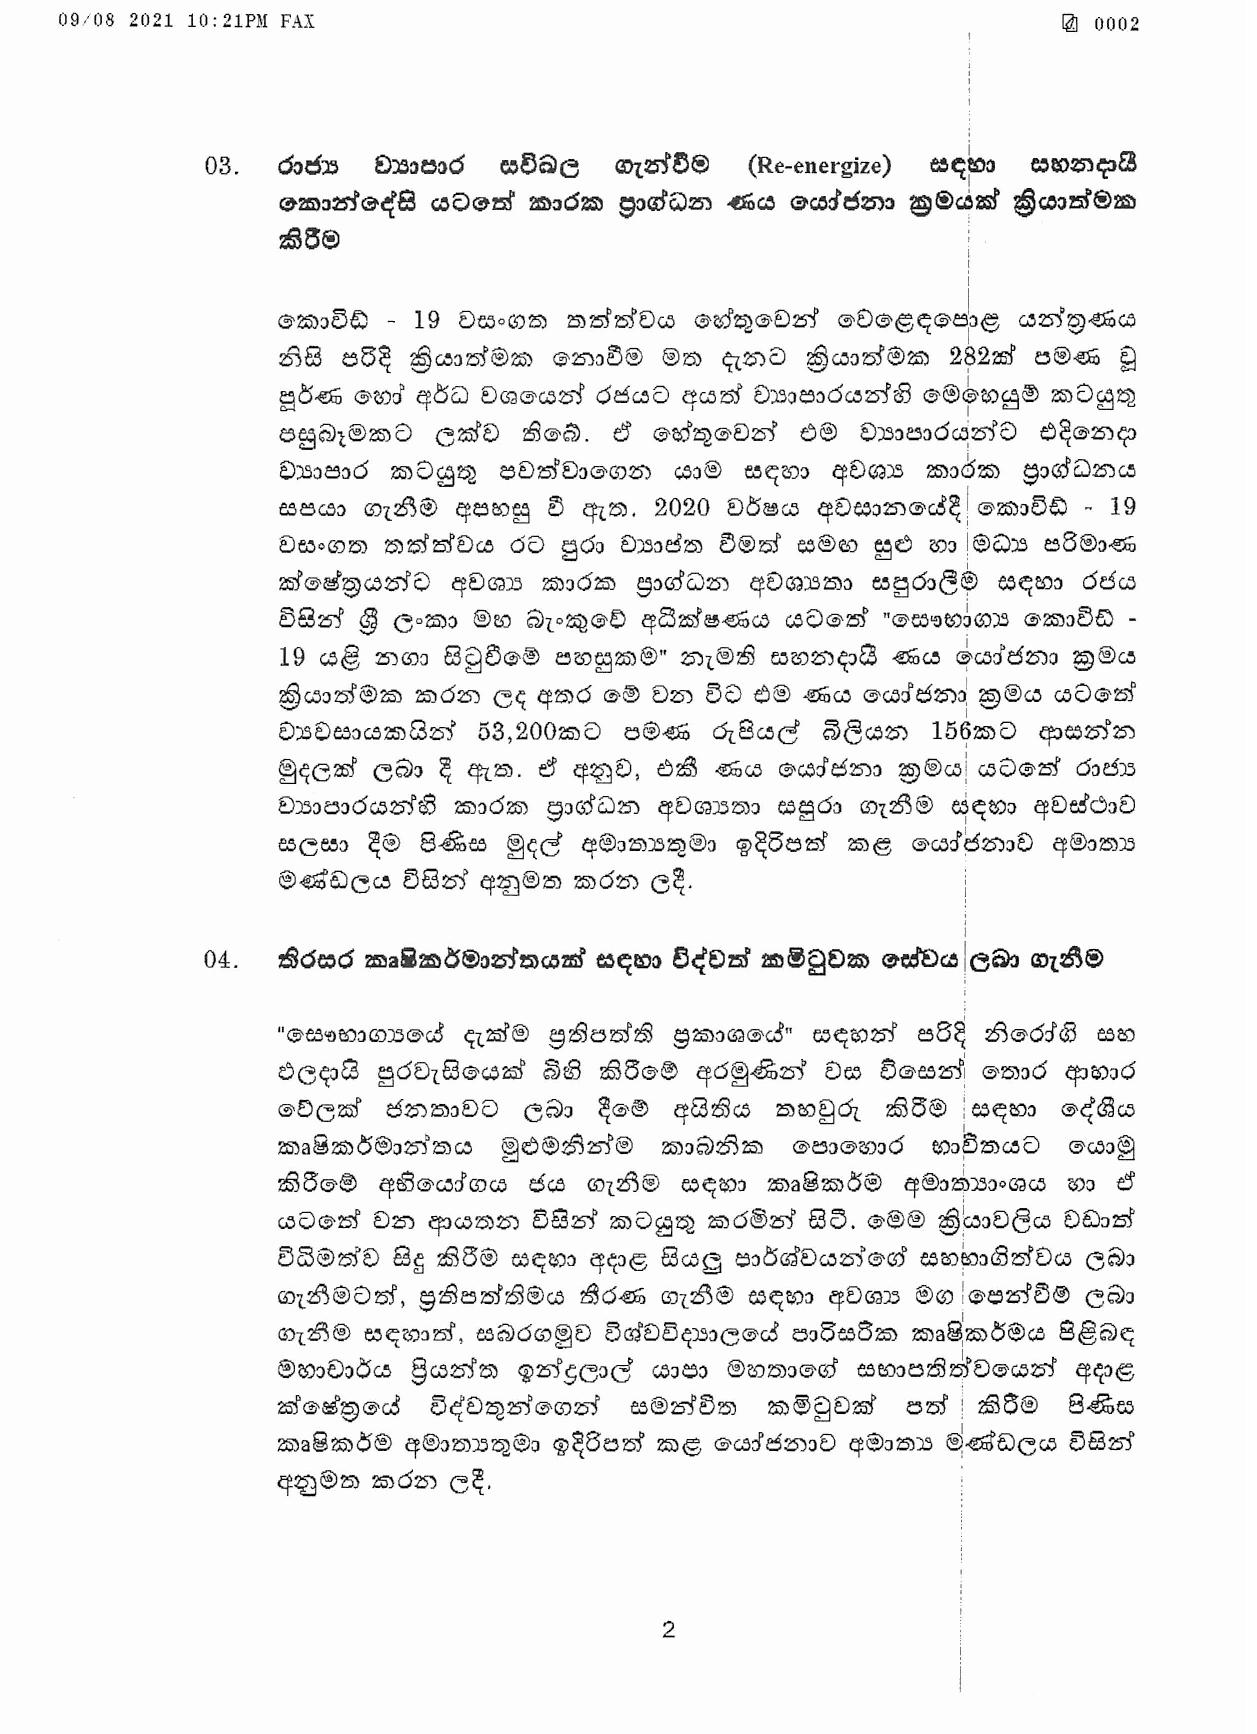 Cabinet Decision on 09.08.2021 Sinhala page 002